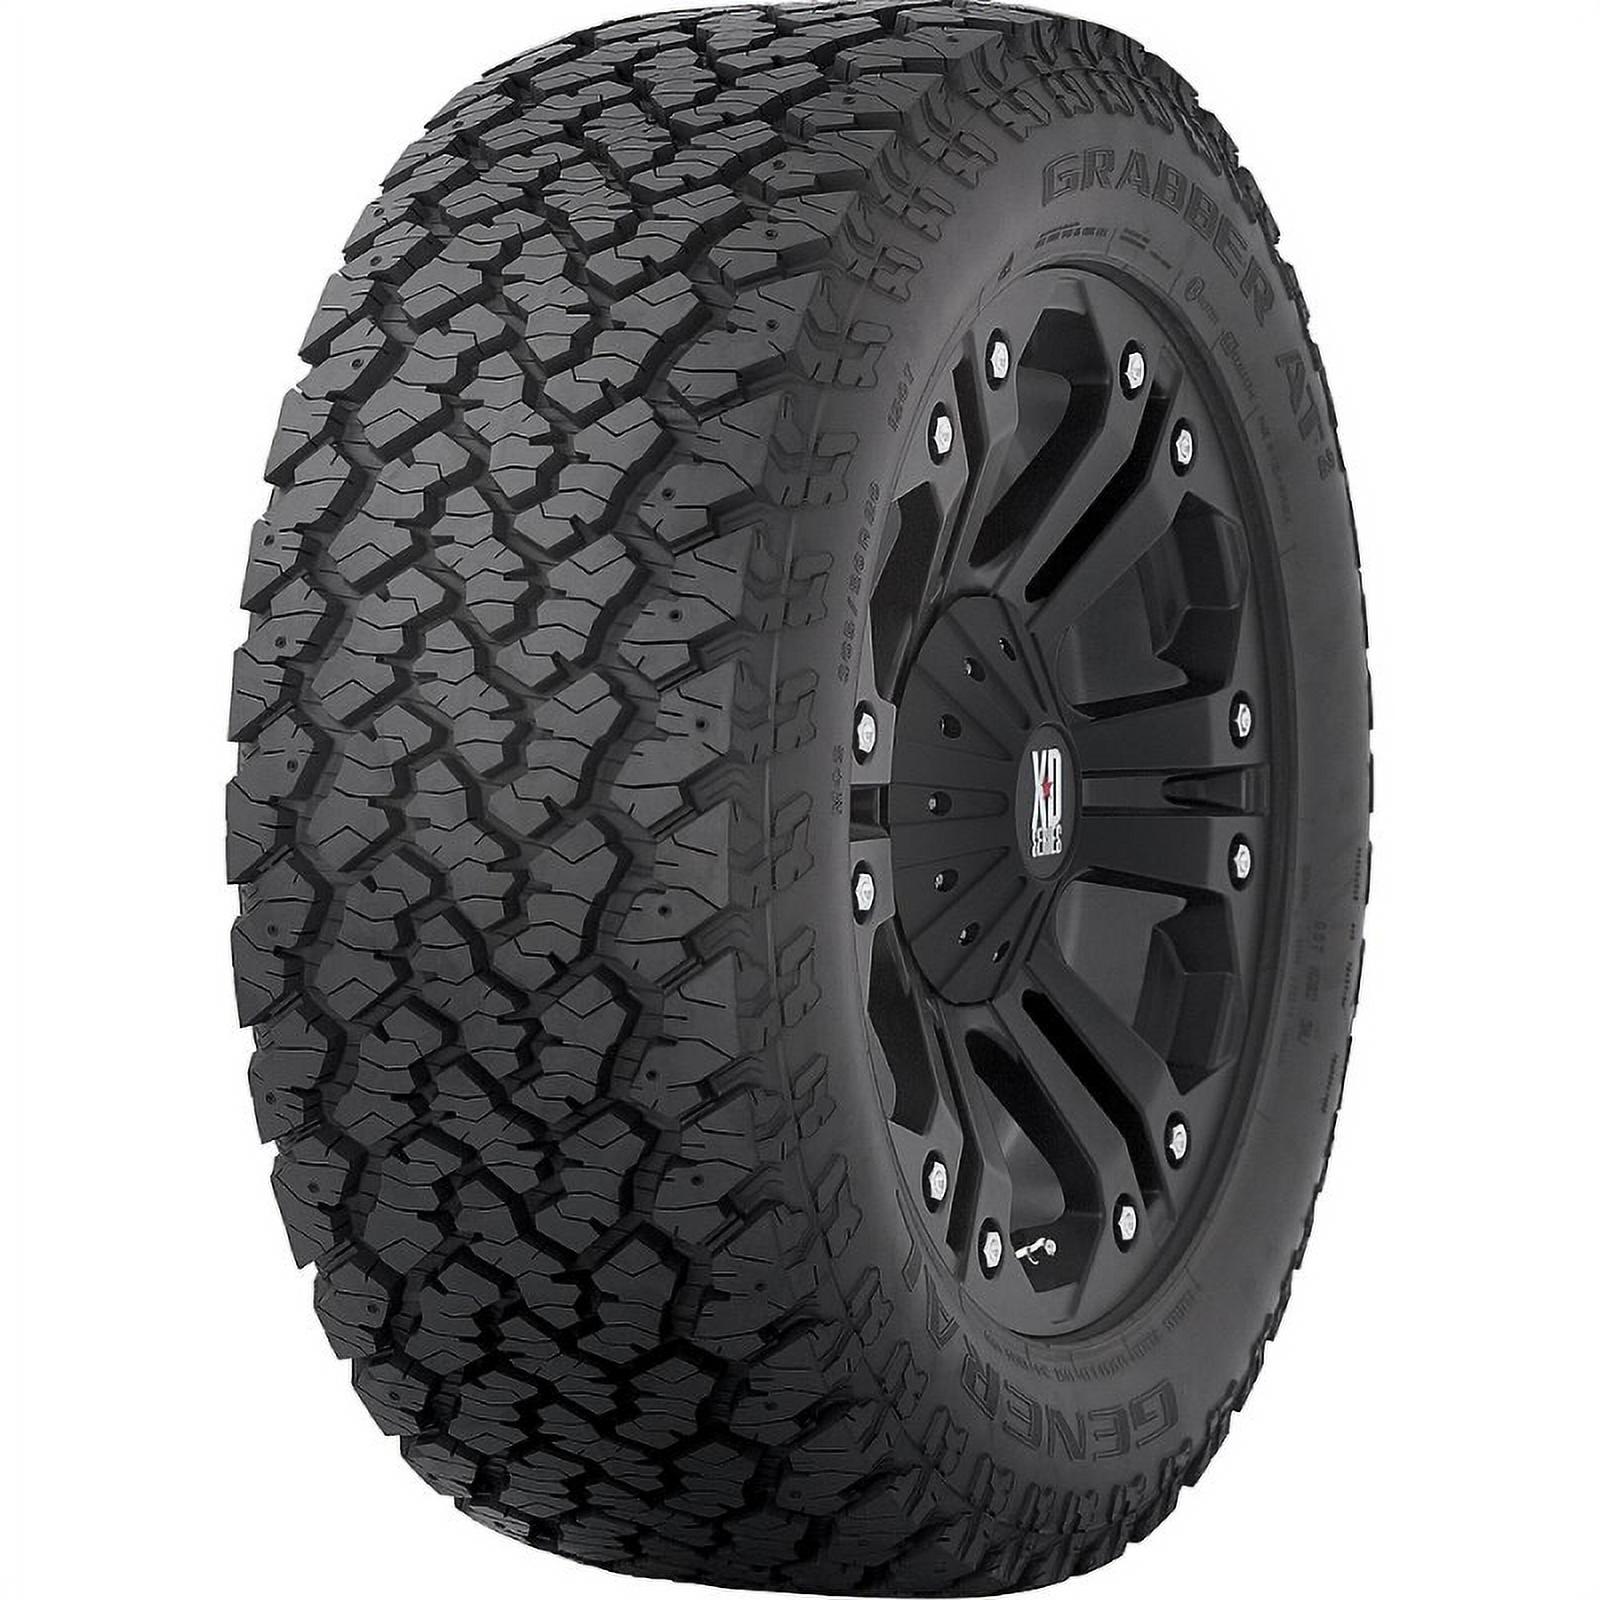 General Grabber AT2 265/70R16 112 S Tire Fits: 2000-06 Toyota Tundra SR5, 2003-04 Ford F-150 Lariat - image 1 of 4